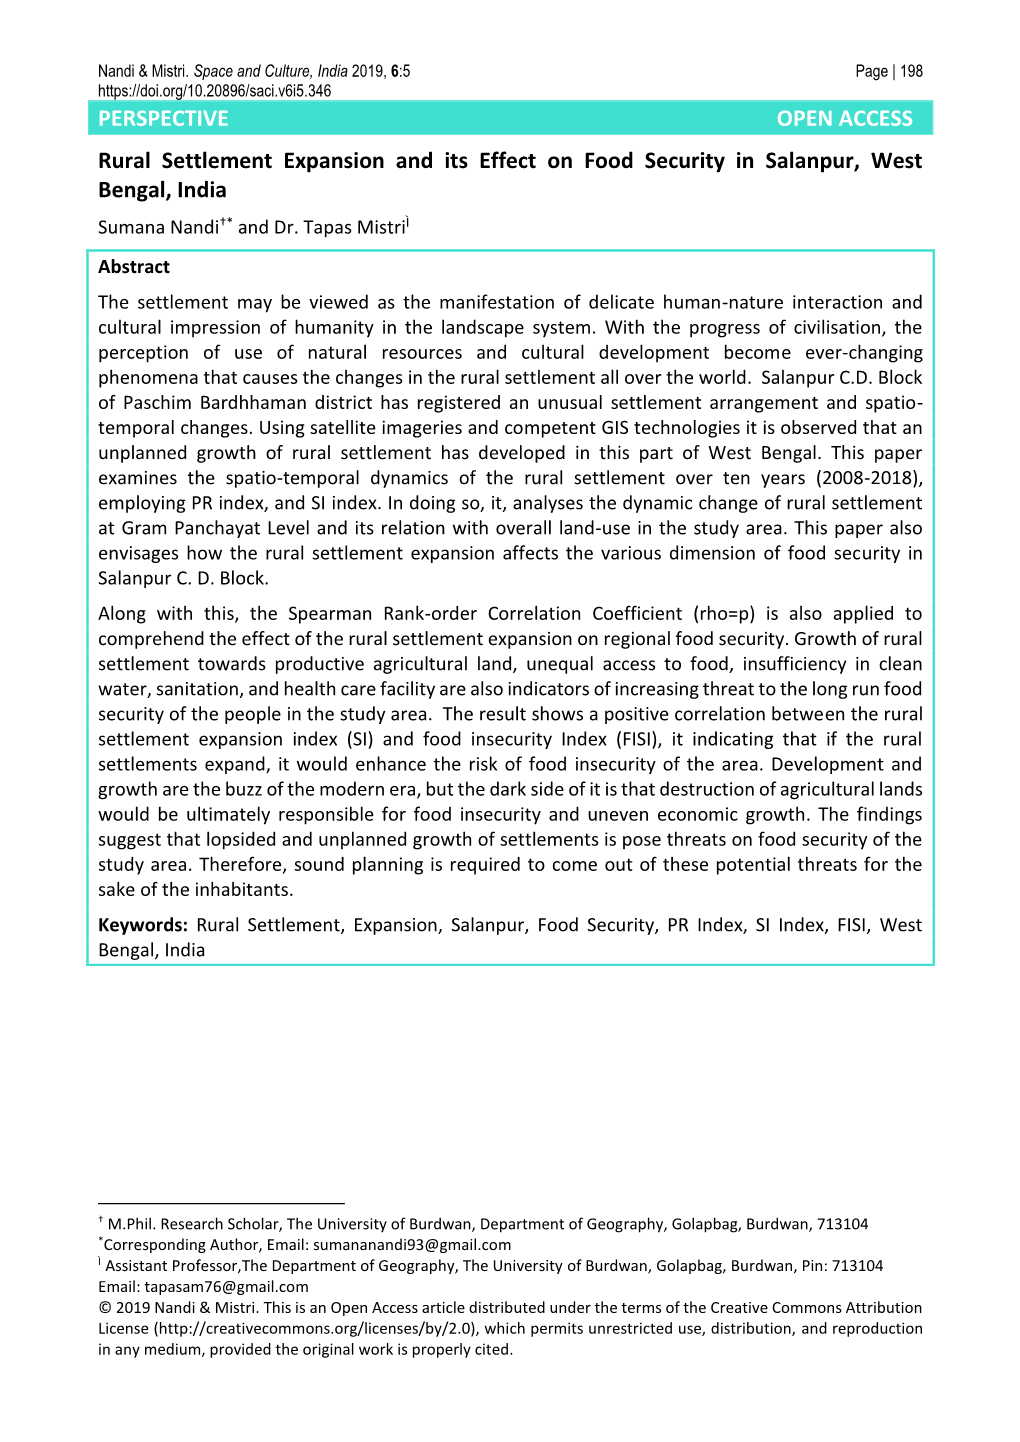 PERSPECTIVE OPEN ACCESS Rural Settlement Expansion and Its Effect on Food Security in Salanpur, West Bengal, India Sumana Nandi†* and Dr